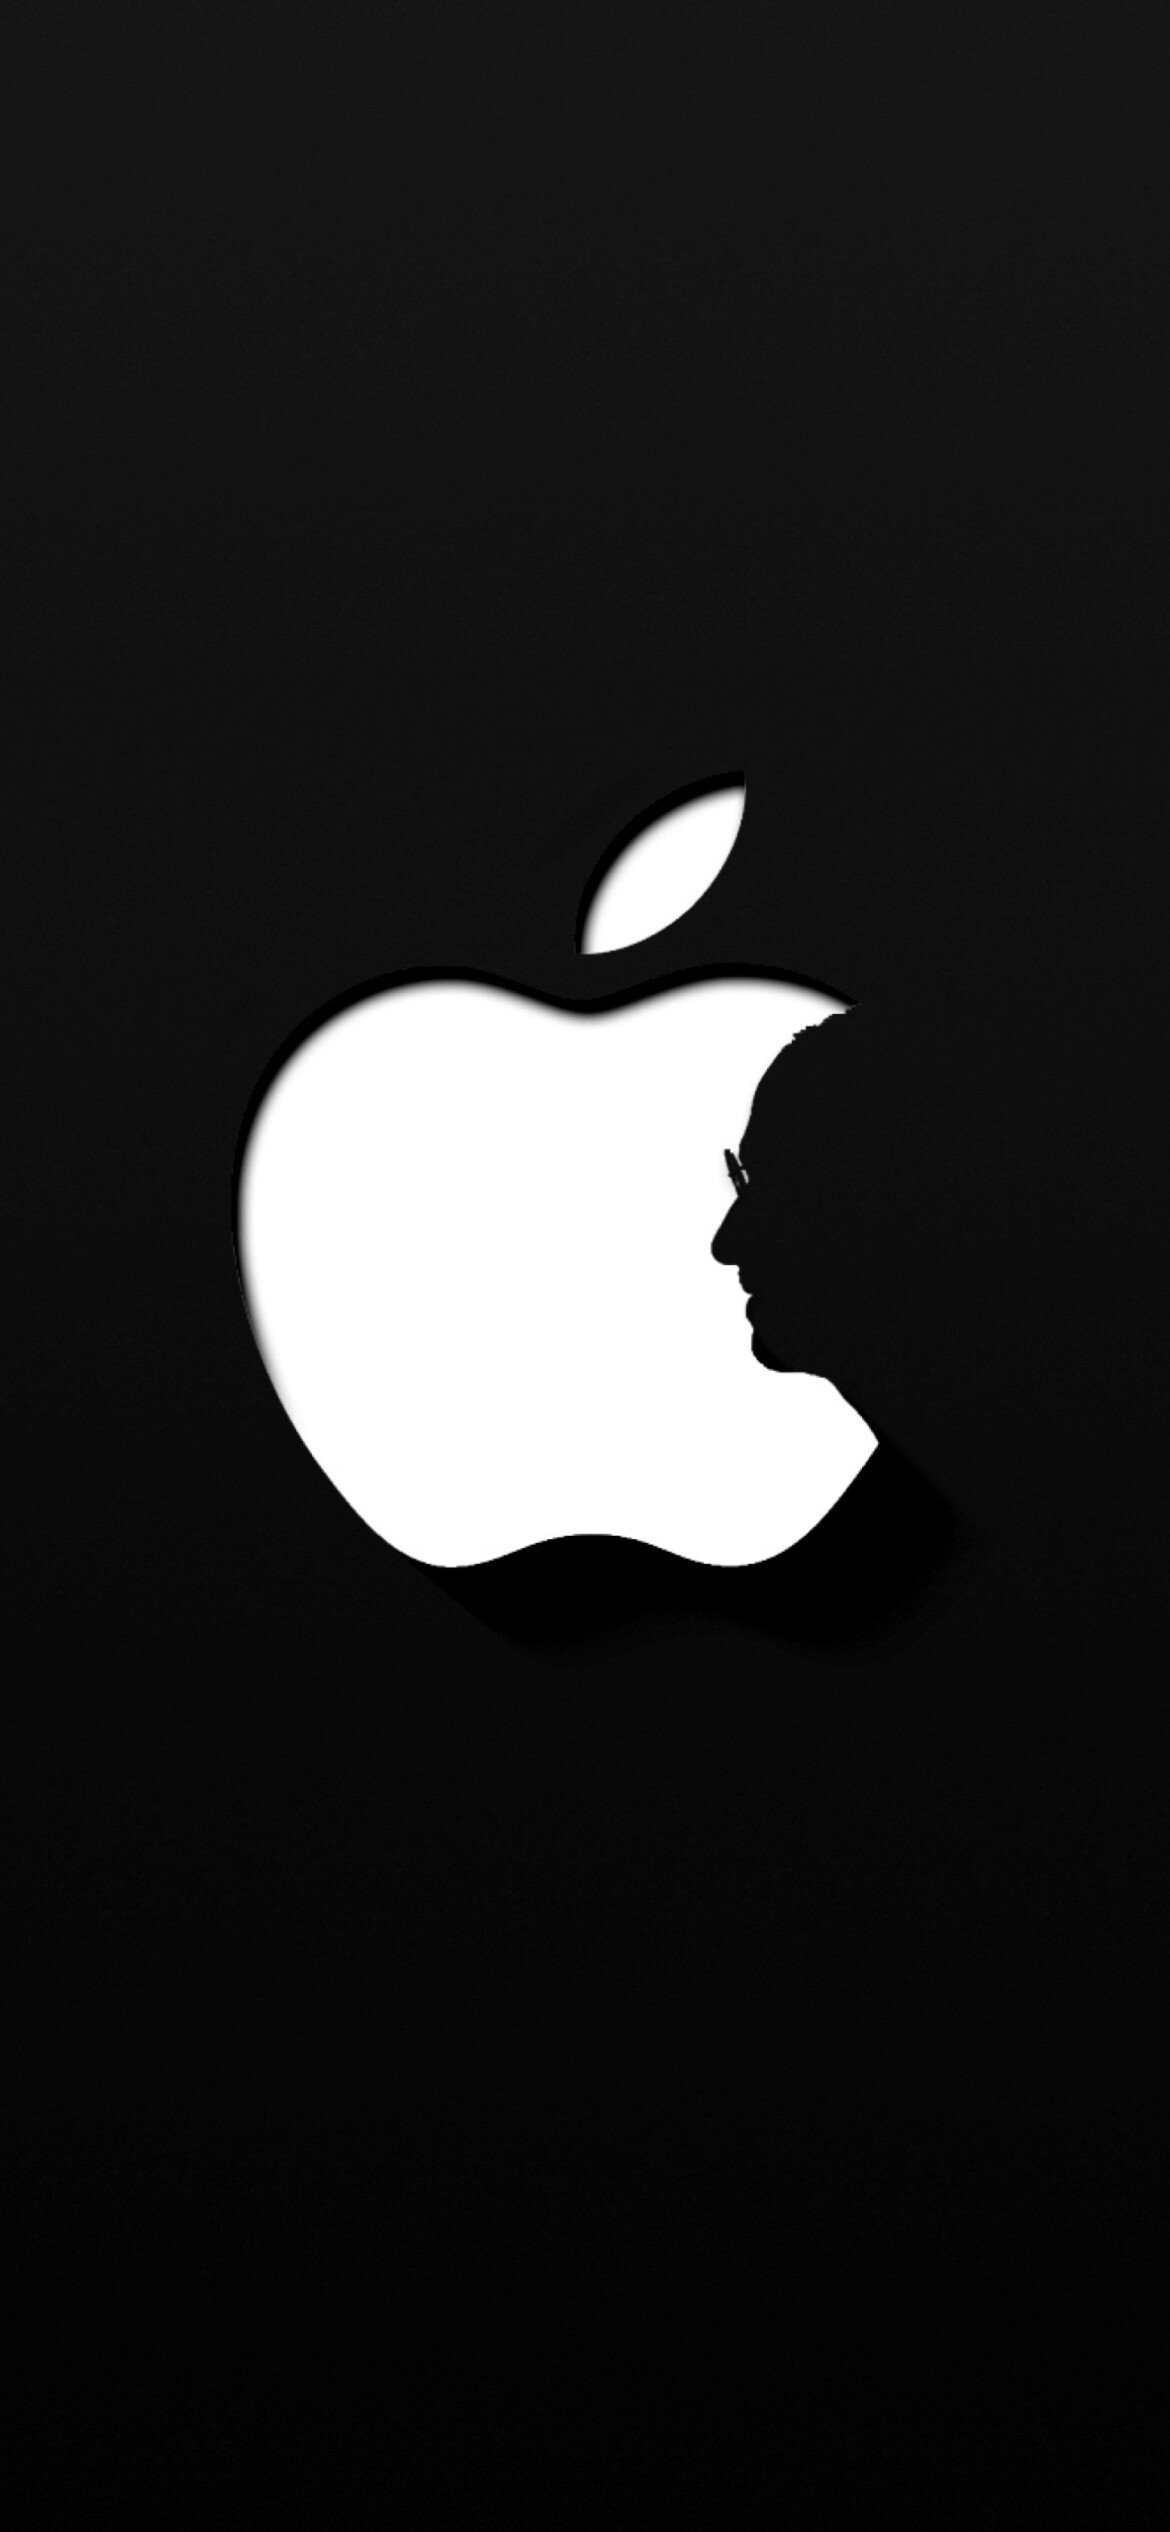 Steve Jobs: Apple, An American multinational technology company, Co-founder. 1170x2540 HD Background.